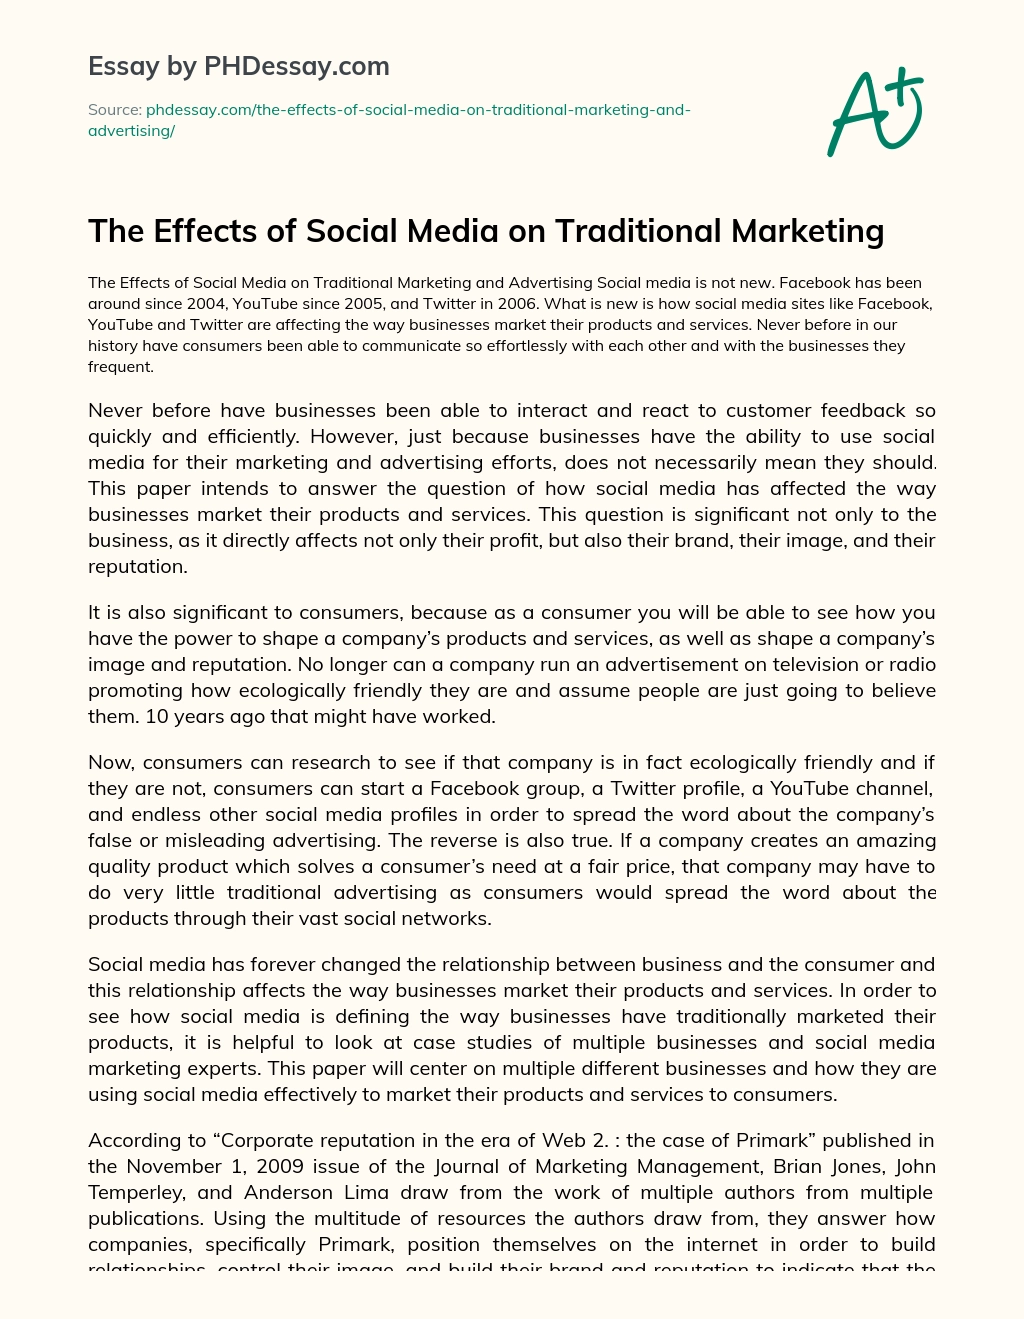 The Effects of Social Media on Traditional Marketing essay